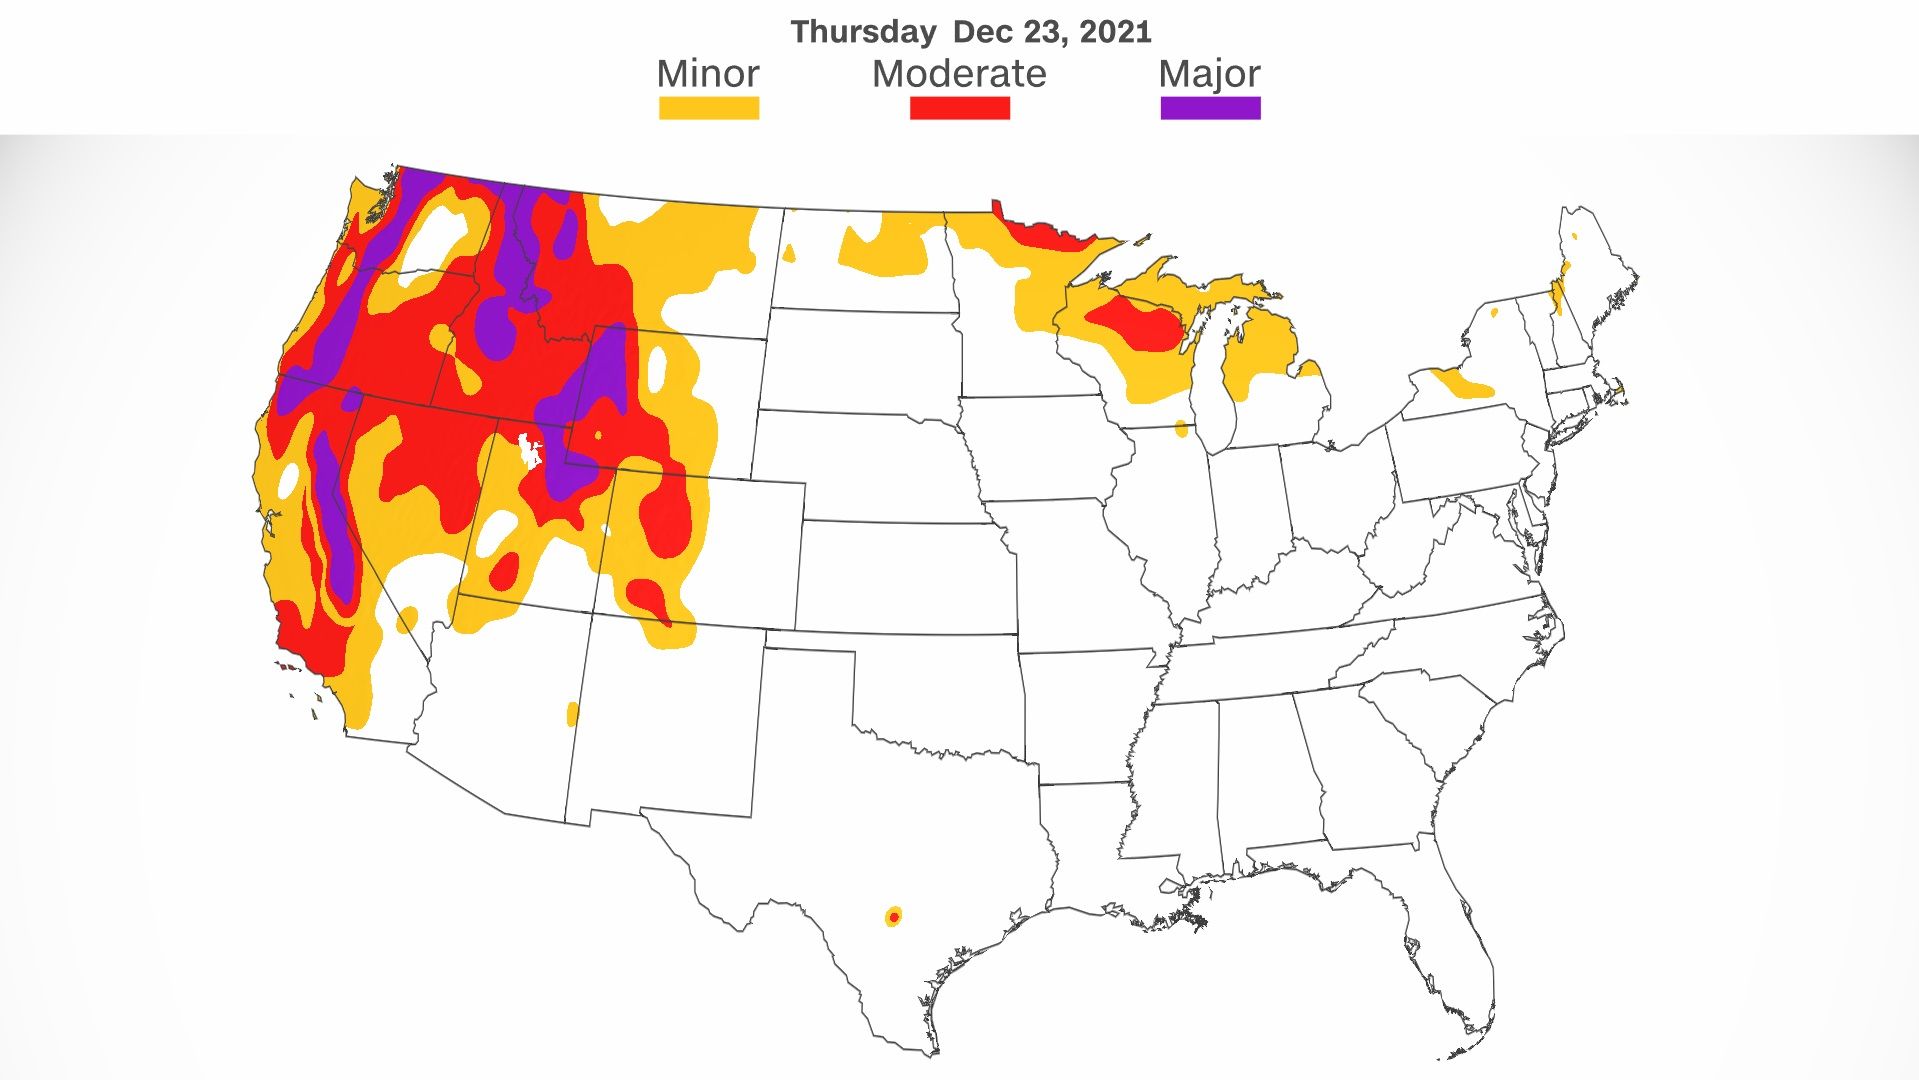 Widespread moderate to major travel delays are forecast across the western US while minor to moderate travel delays are forecast across the Upper Midwest and Great Lakes on Thursday.